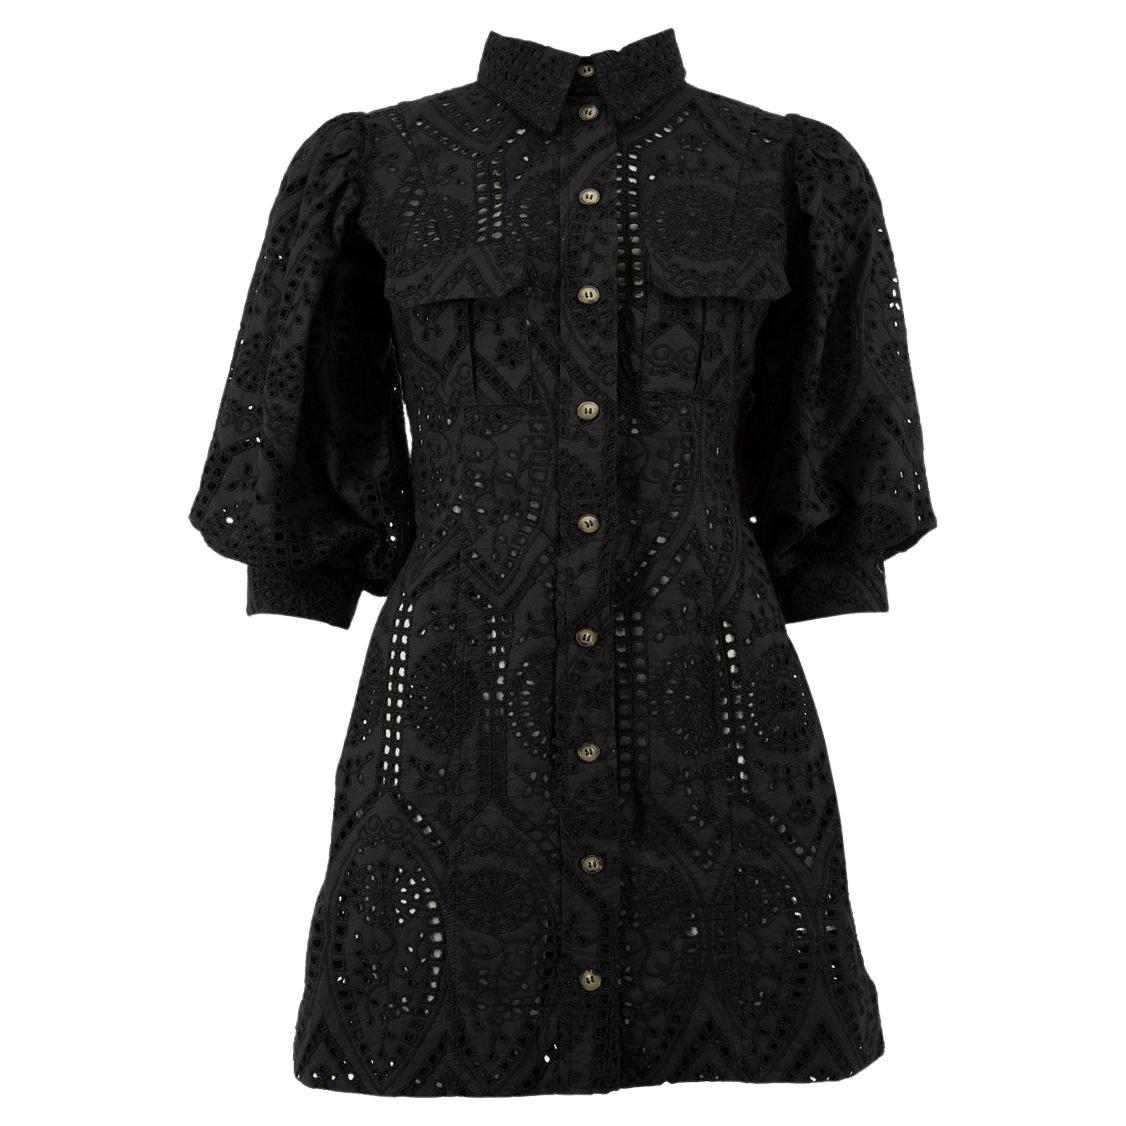 Ganni Women's Black Perforated Embroidered Shirt Dress